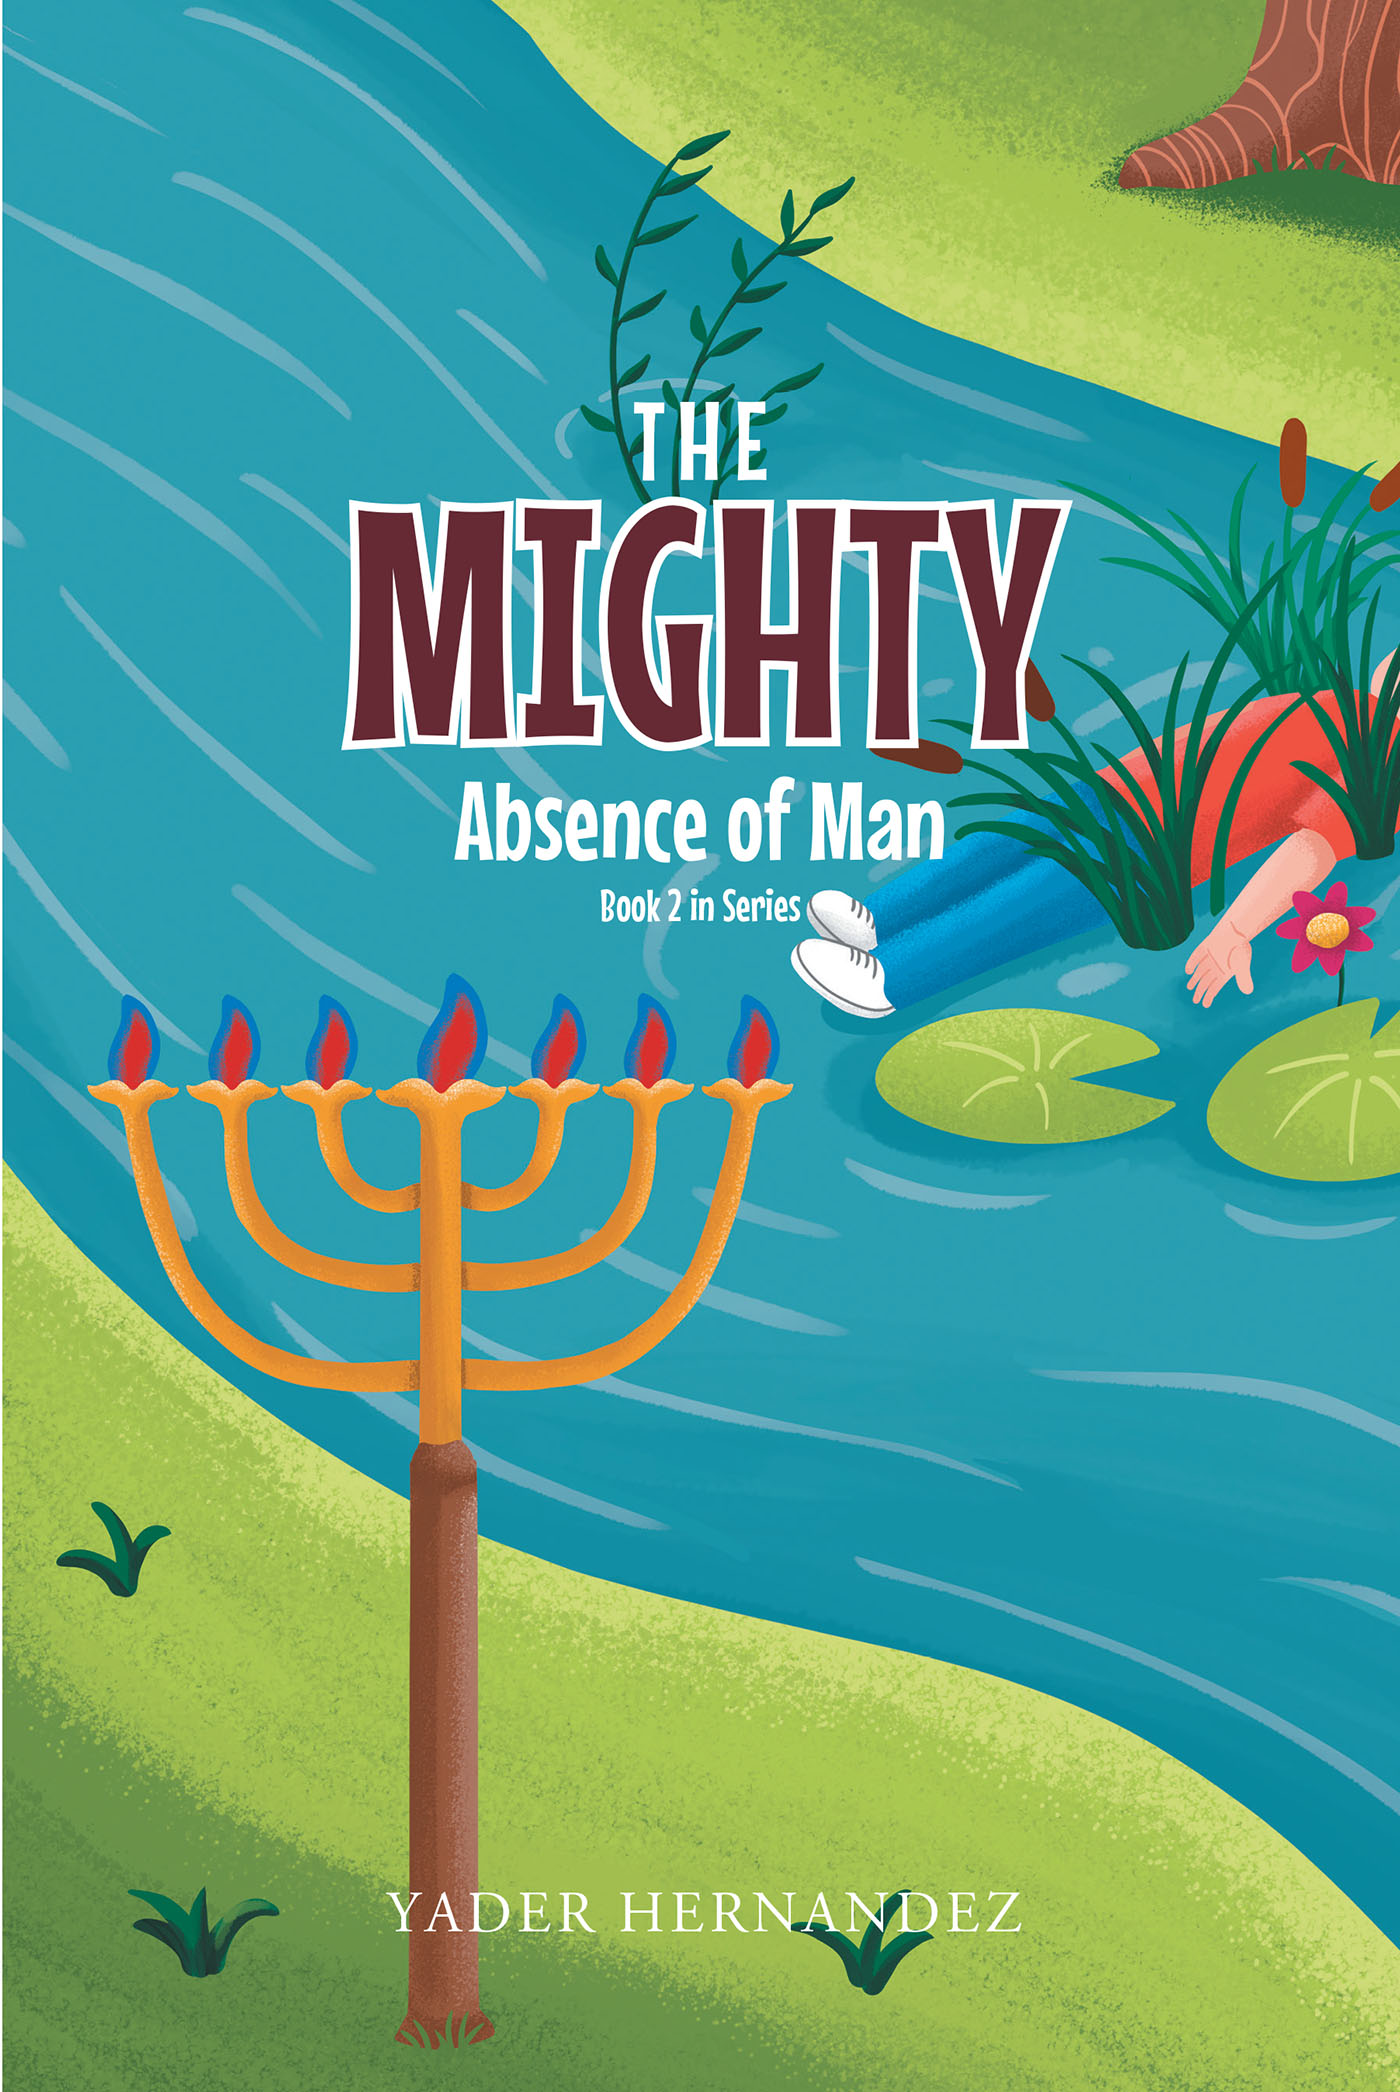 Author Yader Hernandez’s New Book, "The Mighty: Absence of Man: Book 2 in Series," Follows a Group Known as the Truecians as They Prepare to Fight a Bloodsucking Enemy